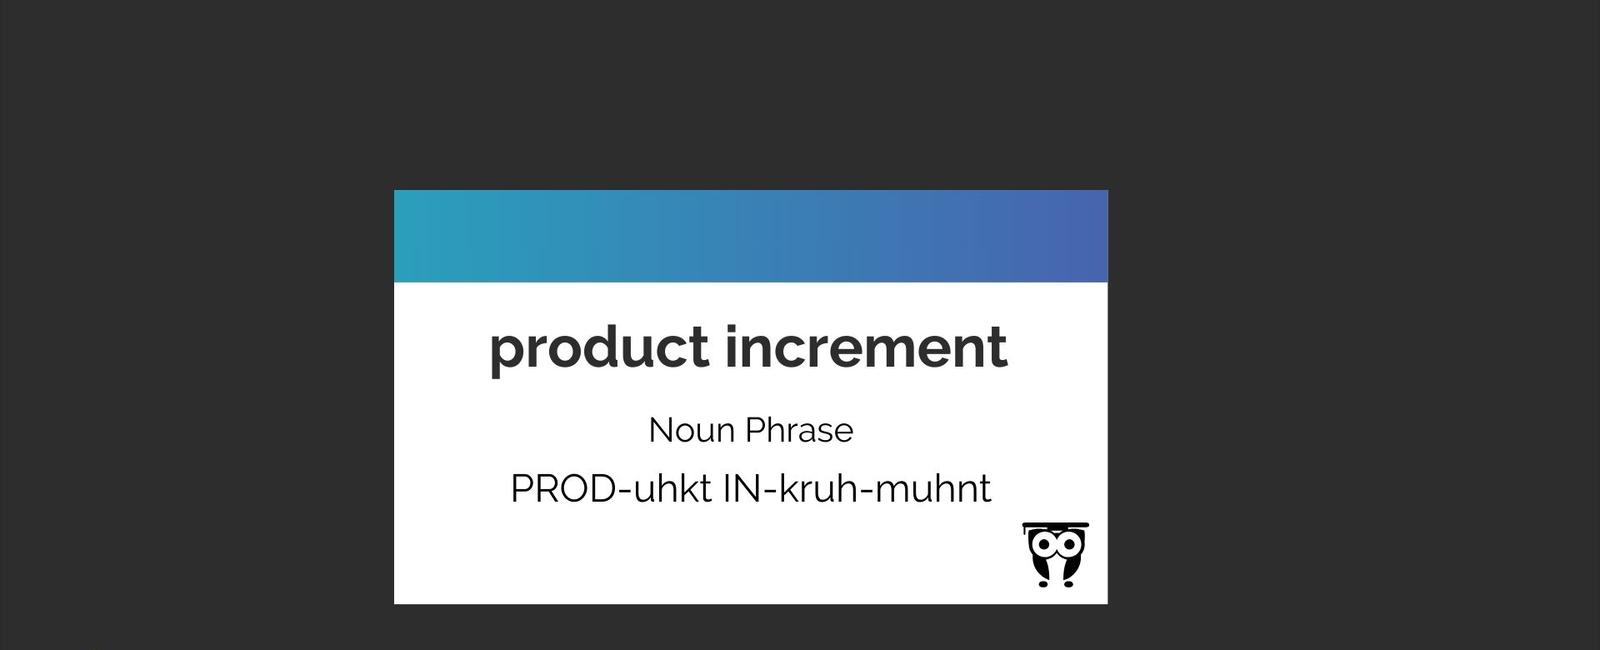 Product Increment